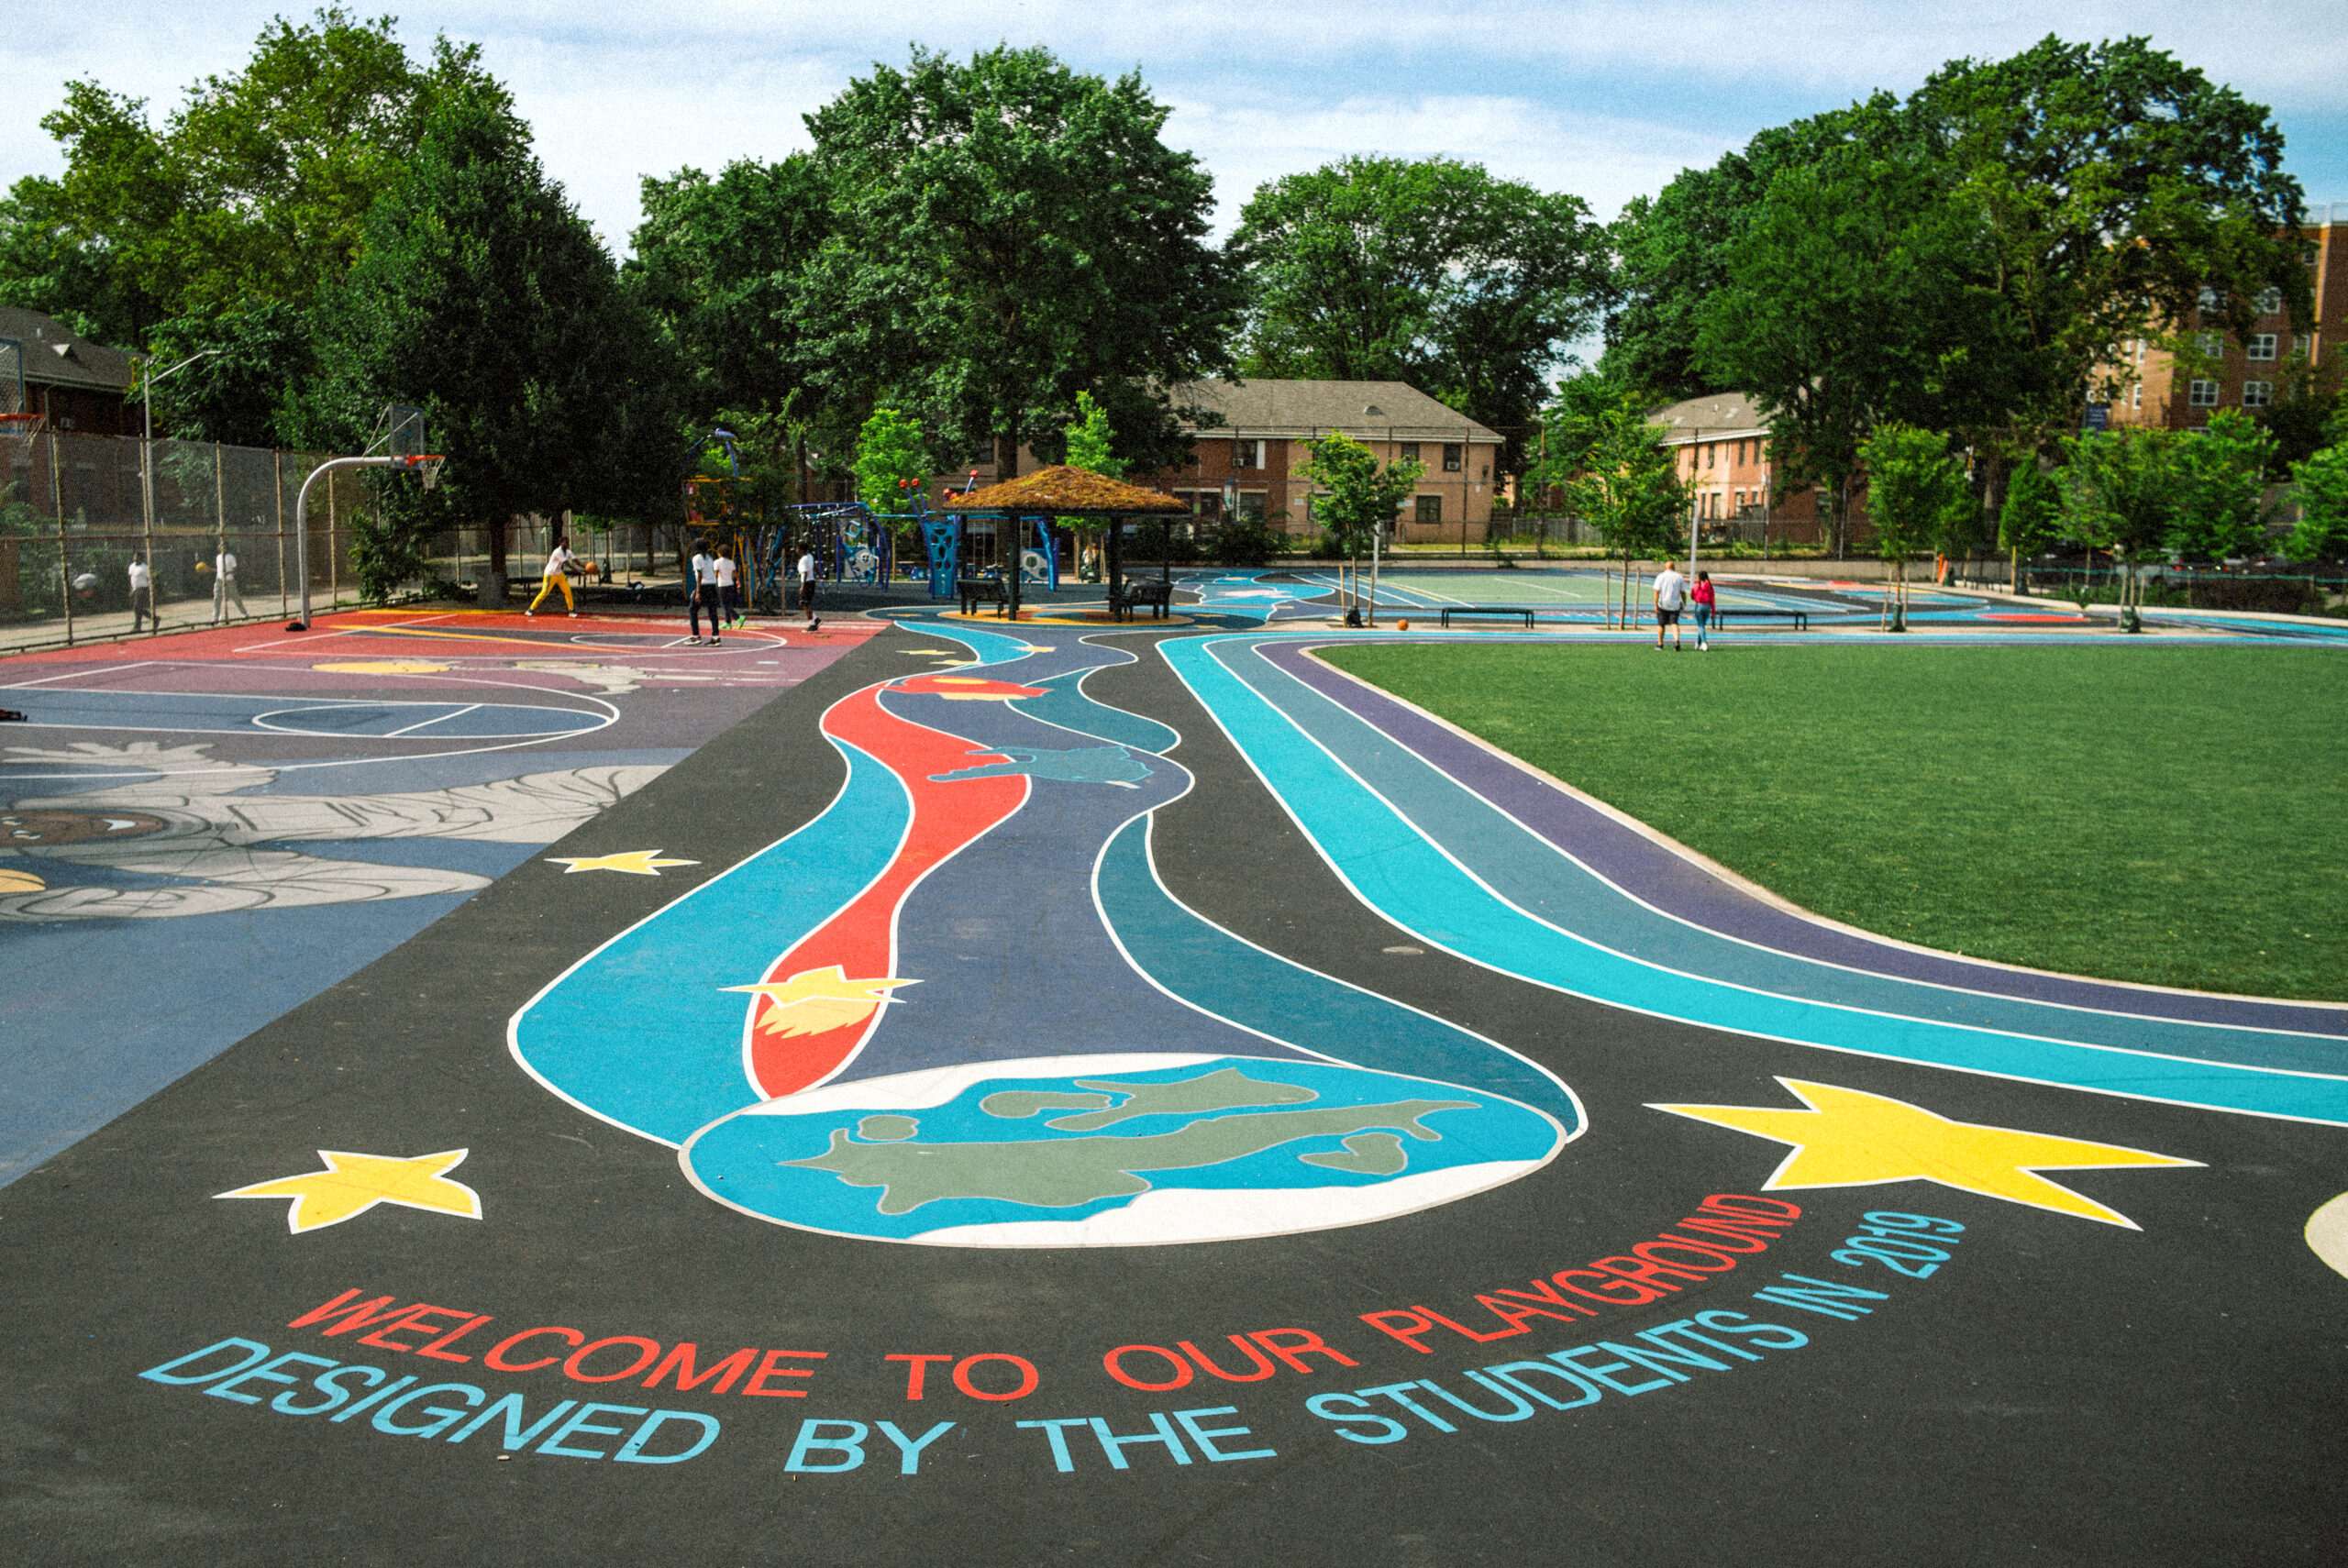 A brightly colored running track surface with the words "Welcome To Our Playground, Designed By the Students in 2019" surrounds a grass playing field at an elementary school.